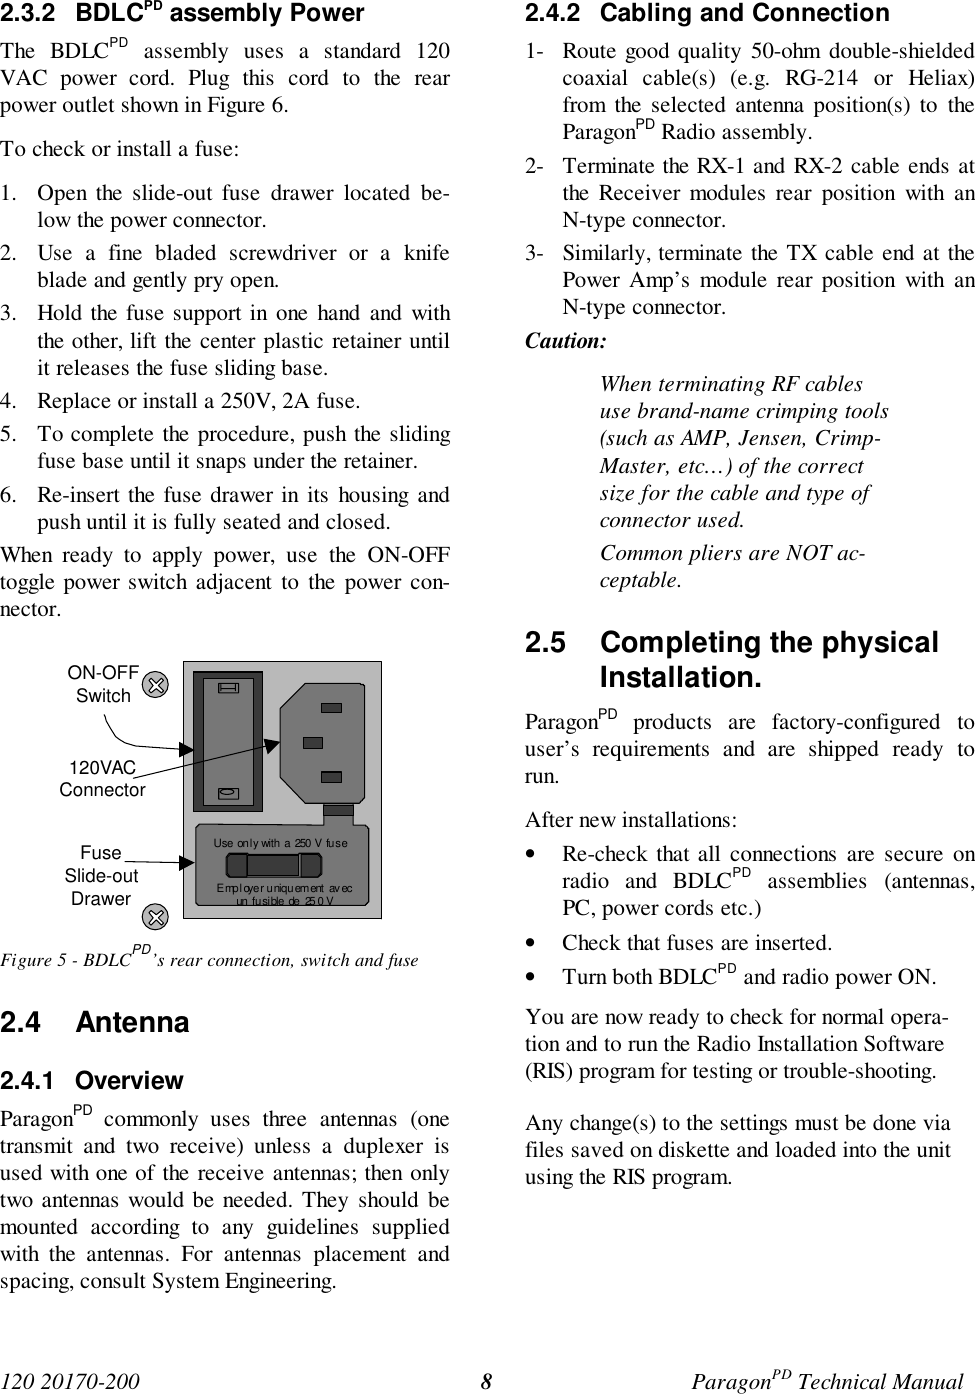 120 20170-200 ParagonPD Technical Manual82.3.2 BDLCPD assembly PowerThe BDLCPD assembly uses a standard 120VAC power cord. Plug this cord to the rearpower outlet shown in Figure 6.To check or install a fuse:1. Open the slide-out fuse drawer located be-low the power connector.2. Use a fine bladed screwdriver or a knifeblade and gently pry open.3. Hold the fuse support in one hand and withthe other, lift the center plastic retainer untilit releases the fuse sliding base.4. Replace or install a 250V, 2A fuse.5. To complete the procedure, push the slidingfuse base until it snaps under the retainer.6. Re-insert the fuse drawer in its housing andpush until it is fully seated and closed.When ready to apply power, use the ON-OFFtoggle power switch adjacent to the power con-nector.Figure 5 - BDLCPD’s rear connection, switch and fuse2.4 Antenna2.4.1 OverviewParagonPD commonly uses three antennas (onetransmit and two receive) unless a duplexer isused with one of the receive antennas; then onlytwo antennas would be needed. They should bemounted according to any guidelines suppliedwith the antennas. For antennas placement andspacing, consult System Engineering.2.4.2  Cabling and Connection1- Route good quality 50-ohm double-shieldedcoaxial cable(s) (e.g. RG-214 or Heliax)from the selected antenna position(s) to theParagonPD Radio assembly.2- Terminate the RX-1 and RX-2 cable ends atthe Receiver modules rear position with anN-type connector.3- Similarly, terminate the TX cable end at thePower Amp’s module rear position with anN-type connector.Caution:When terminating RF cablesuse brand-name crimping tools(such as AMP, Jensen, Crimp-Master, etc…) of the correctsize for the cable and type ofconnector used.Common pliers are NOT ac-ceptable.2.5  Completing the physicalInstallation.ParagonPD products are factory-configured touser’s requirements and are shipped ready torun.After new installations:• Re-check that all connections are secure onradio and BDLCPD assemblies (antennas,PC, power cords etc.)• Check that fuses are inserted.• Turn both BDLCPD and radio power ON.You are now ready to check for normal opera-tion and to run the Radio Installation Software(RIS) program for testing or trouble-shooting.Any change(s) to the settings must be done viafiles saved on diskette and loaded into the unitusing the RIS program.Employer uniquement avecun  fu sible de  25 0 VUse  on l y with  a  250  V  fu s eON-OFFSwitch120VACConnectorFuseSlide-outDrawer